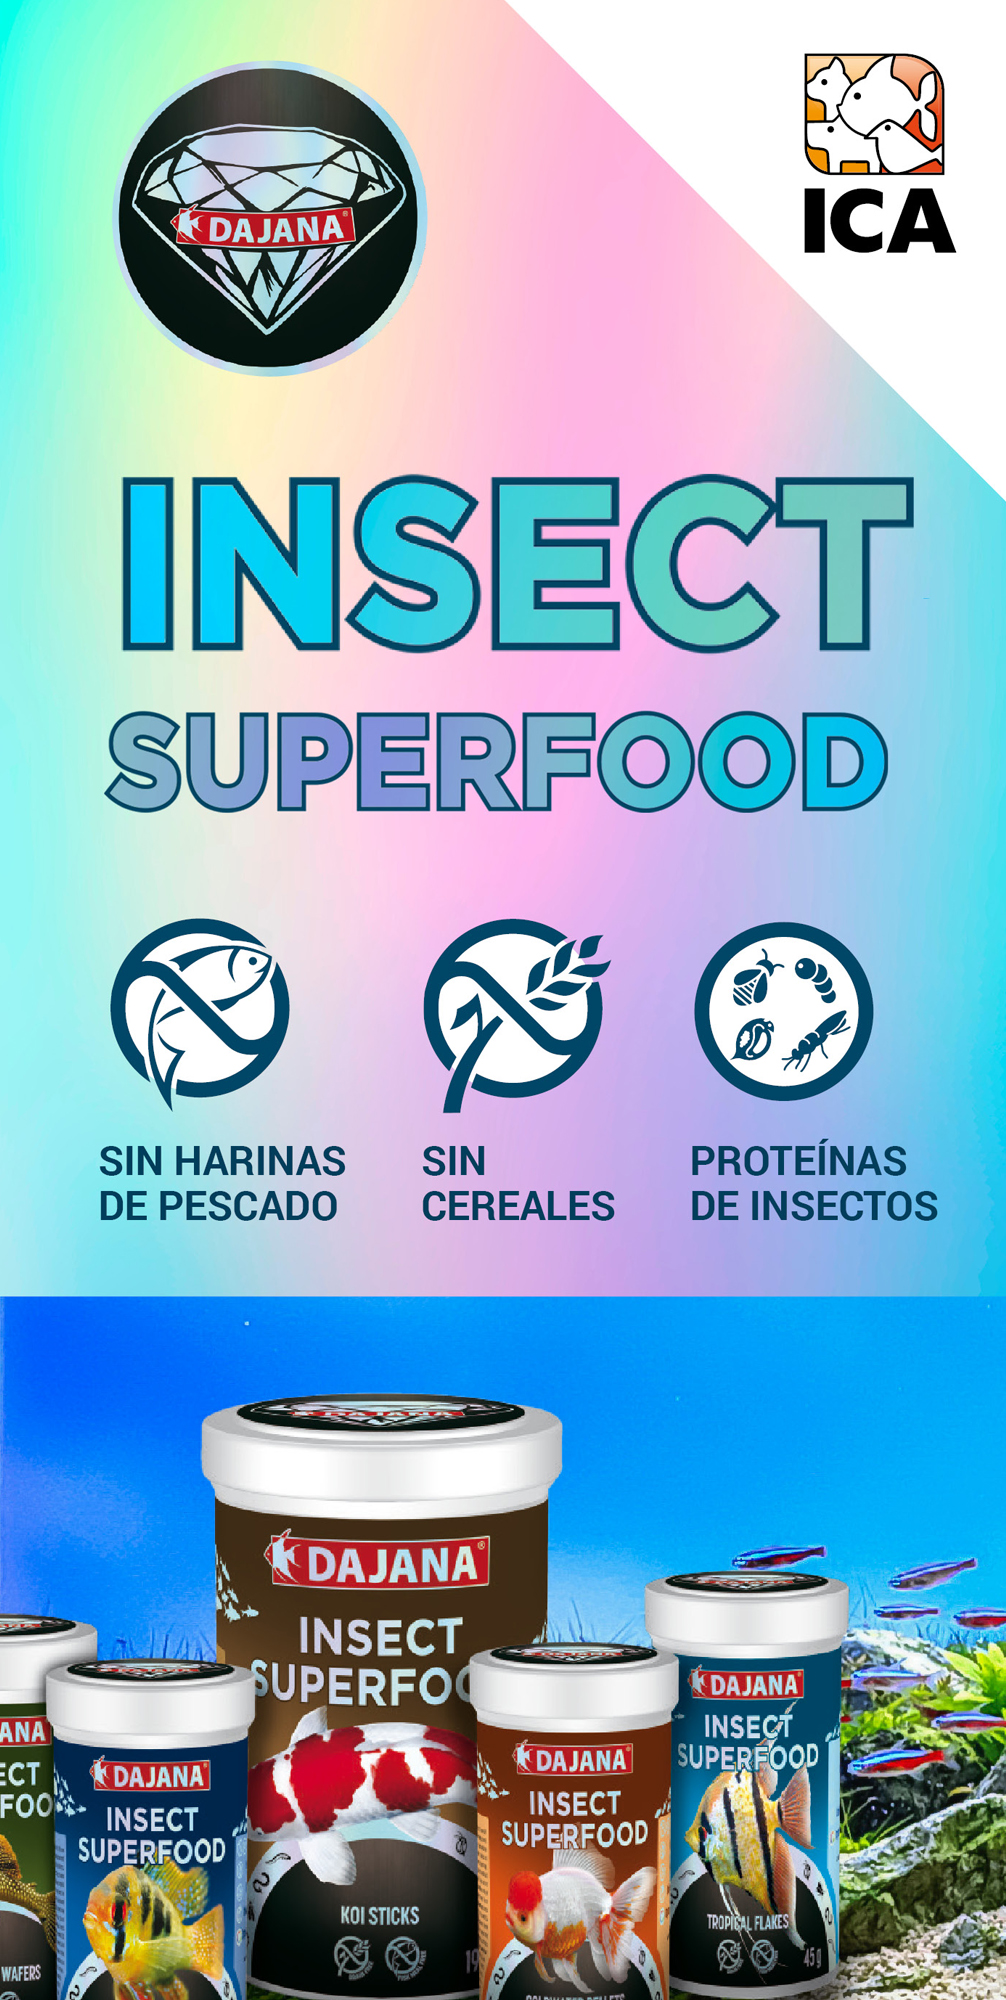 INSECT SUPERFOOD